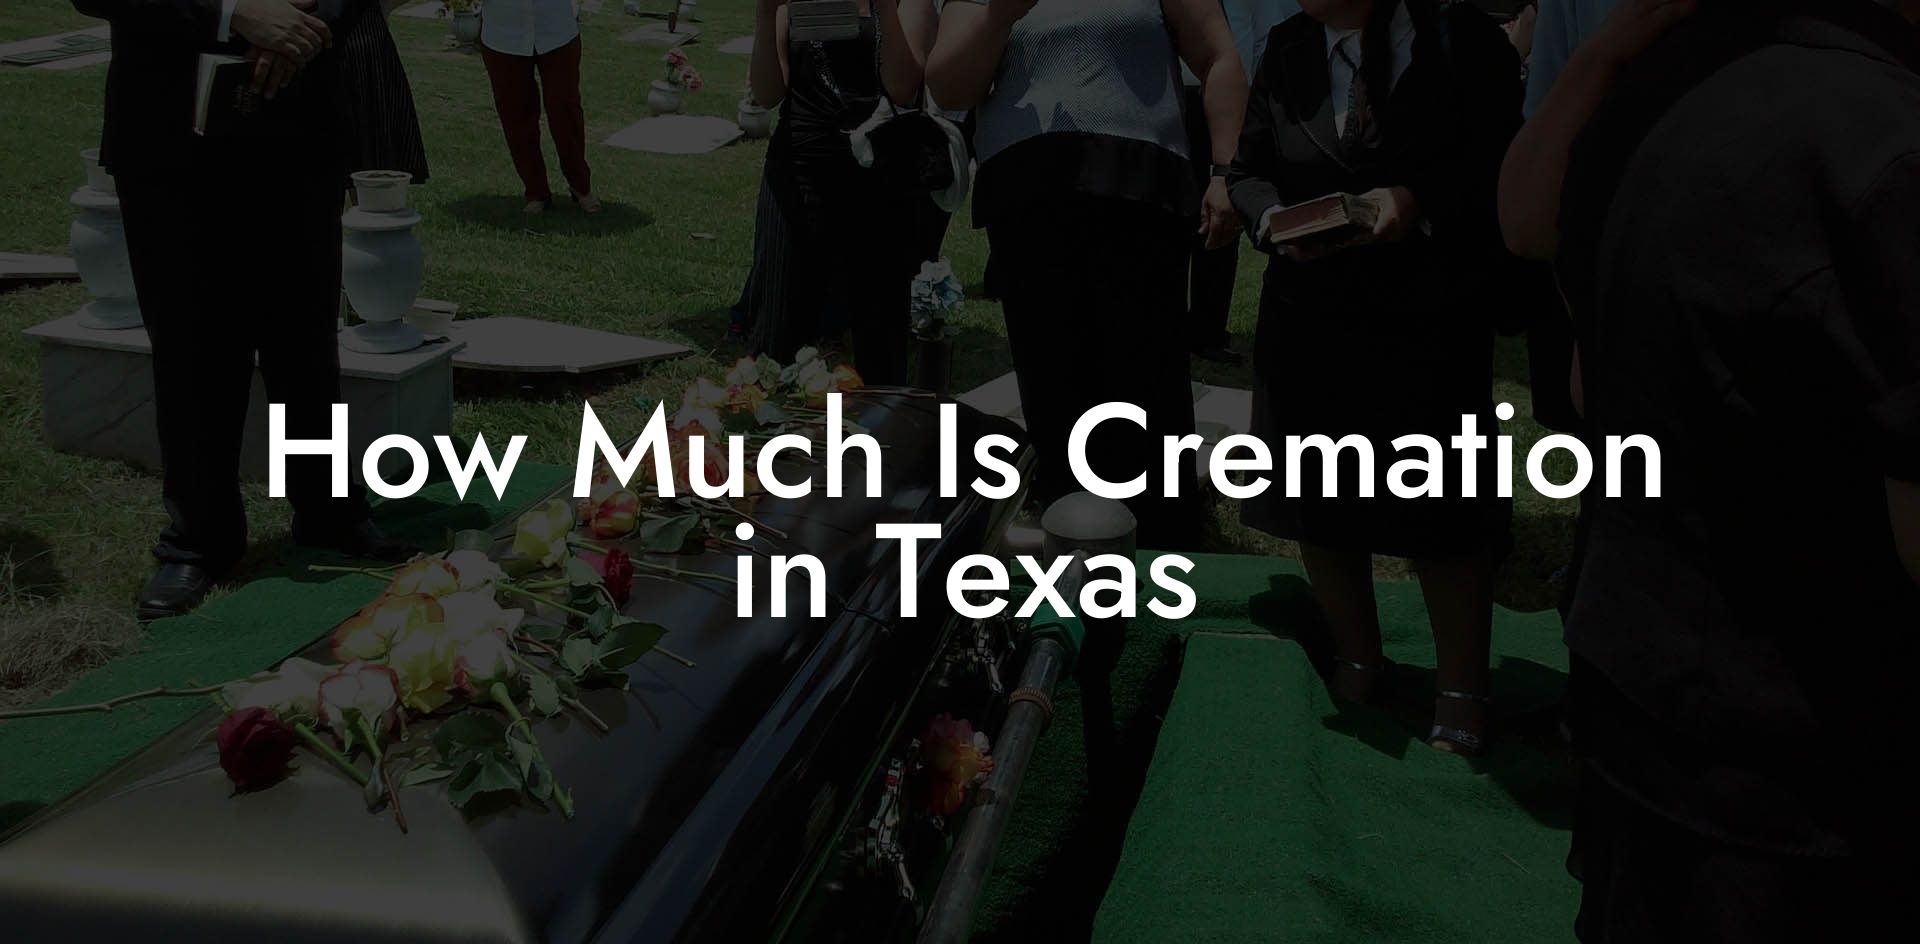 How Much Is Cremation in Texas